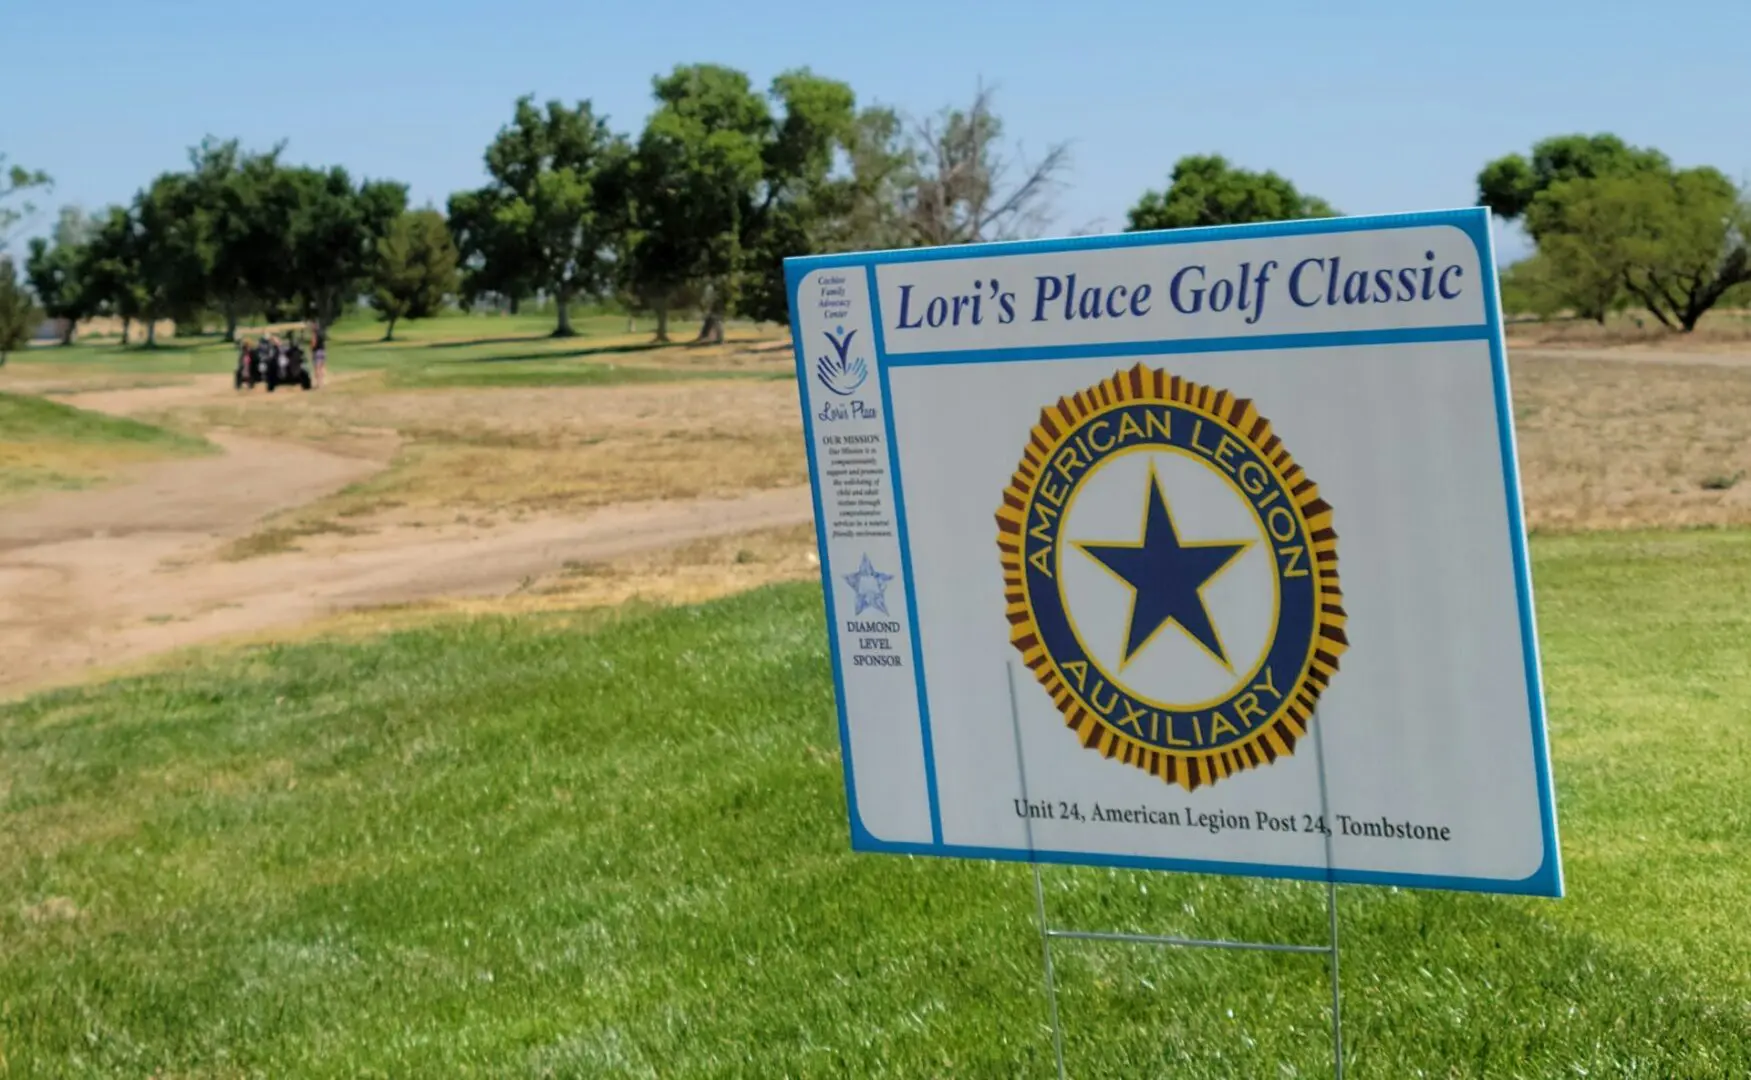 A sign is posted in the grass for lori 's place golf classic.